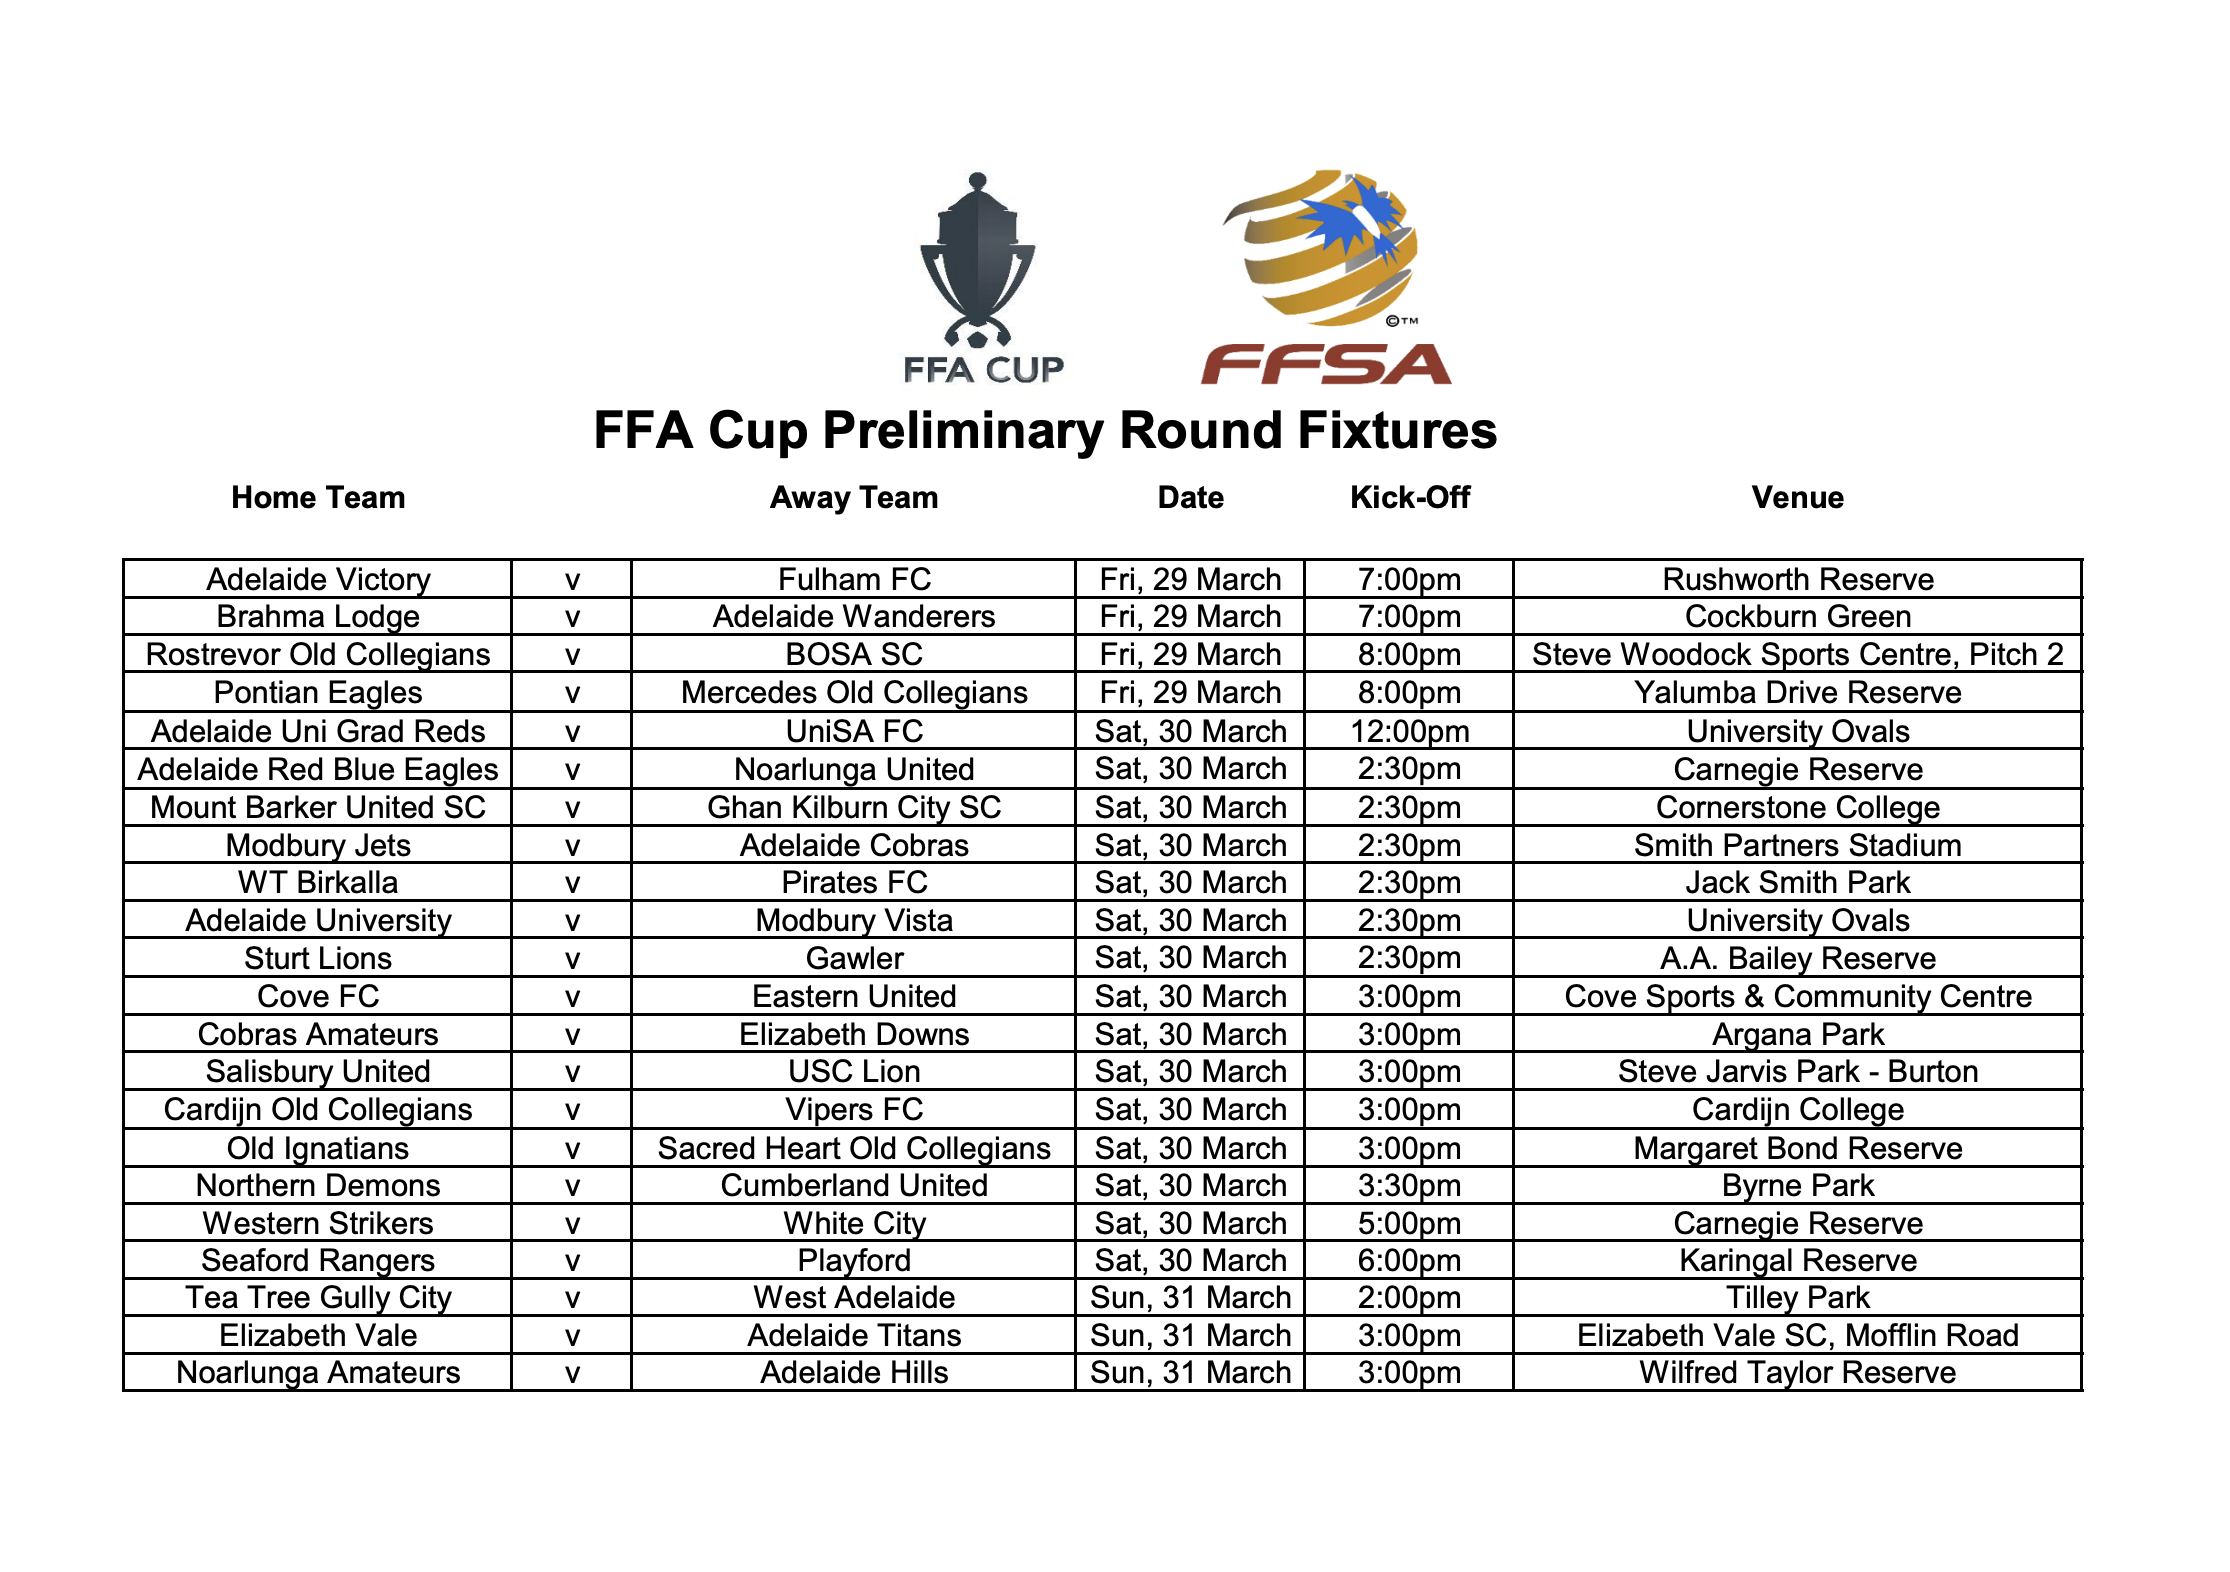 FFA Cup Fixtures, Round 1